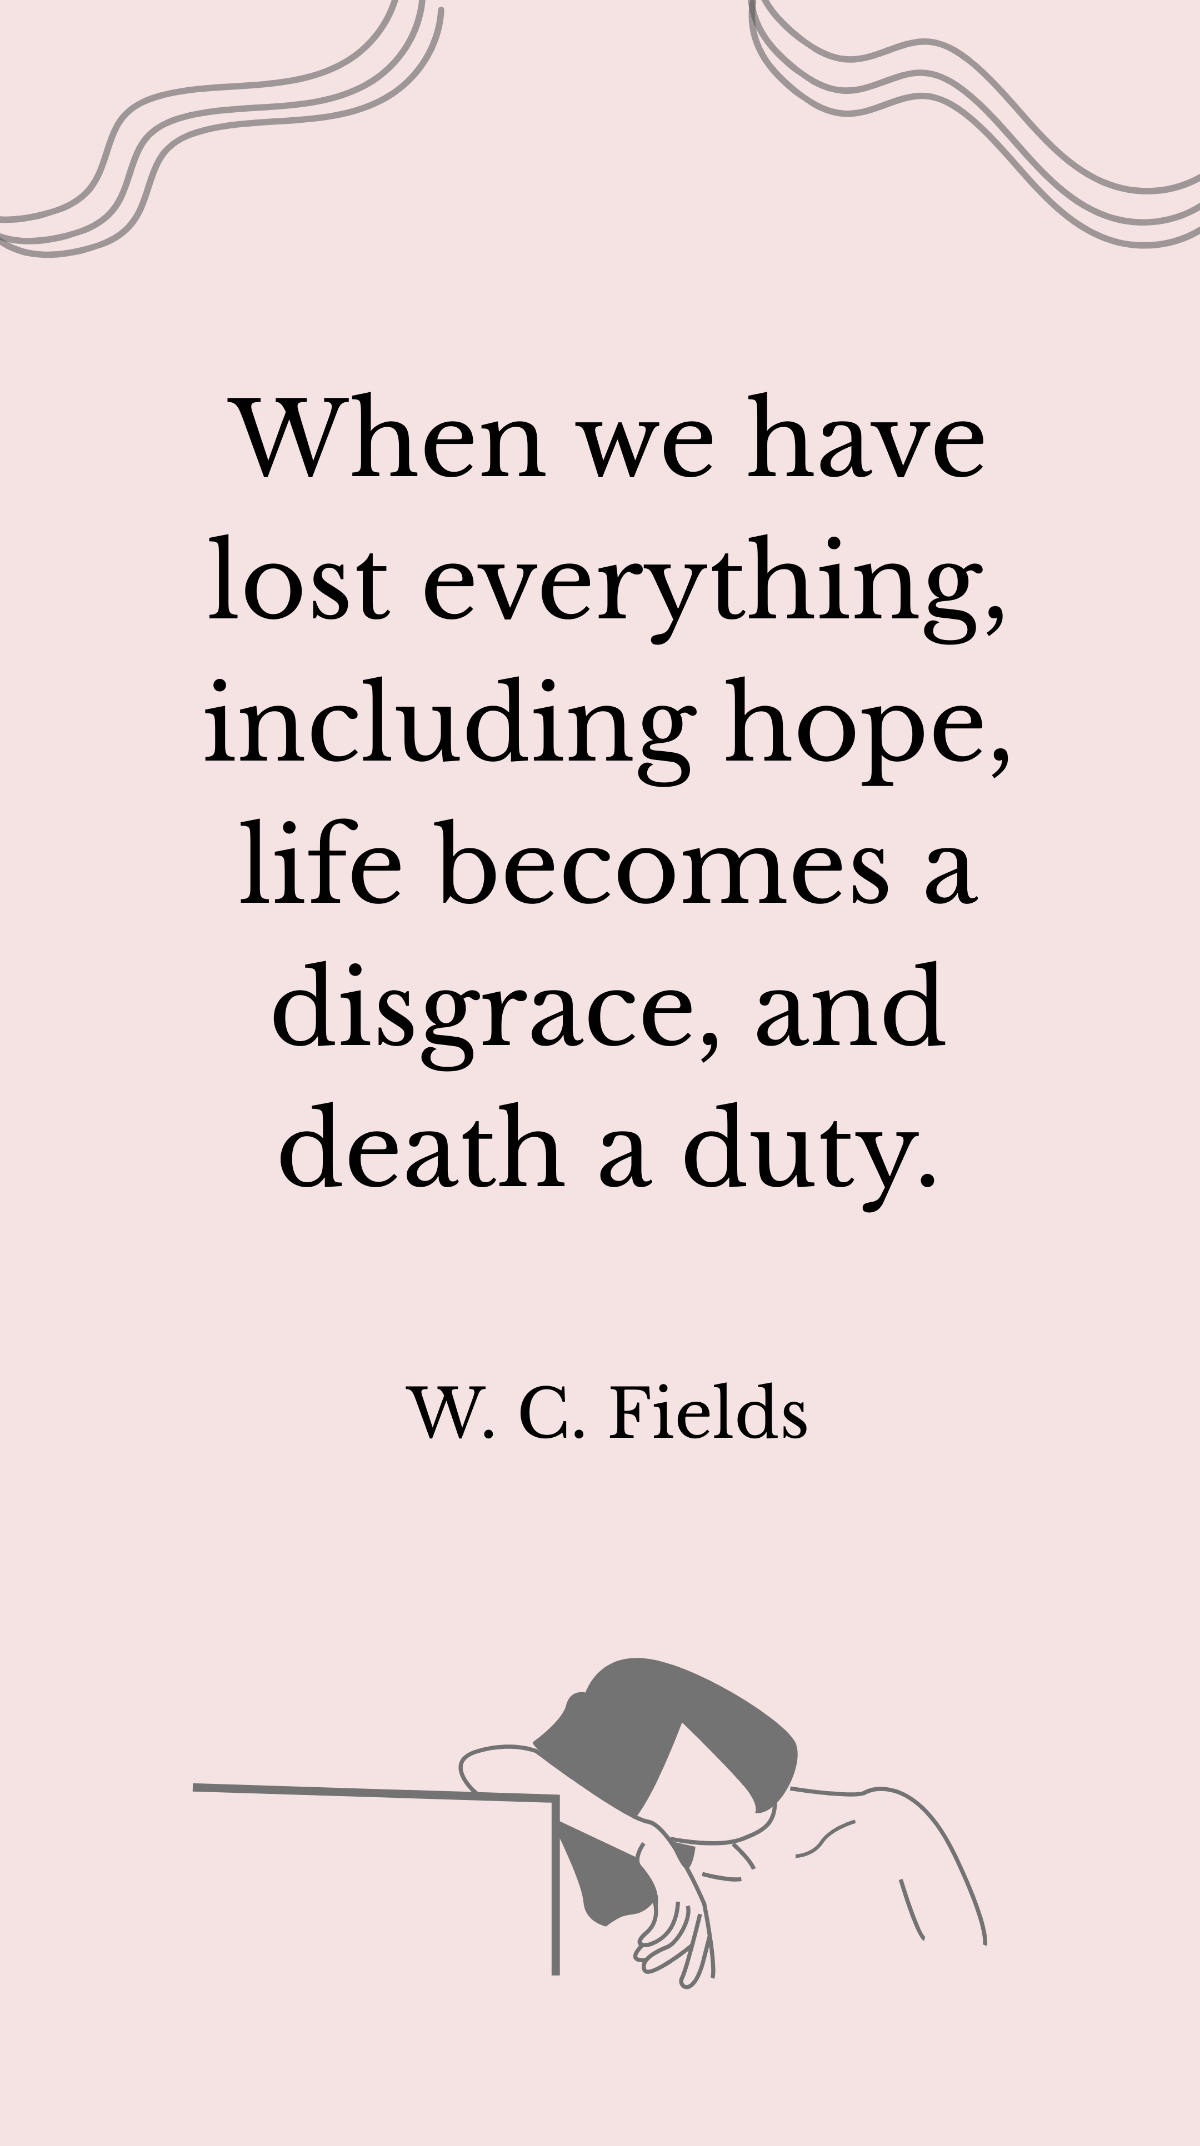 W. C. Fields - When we have lost everything, including hope, life becomes a disgrace, and death a duty. Template